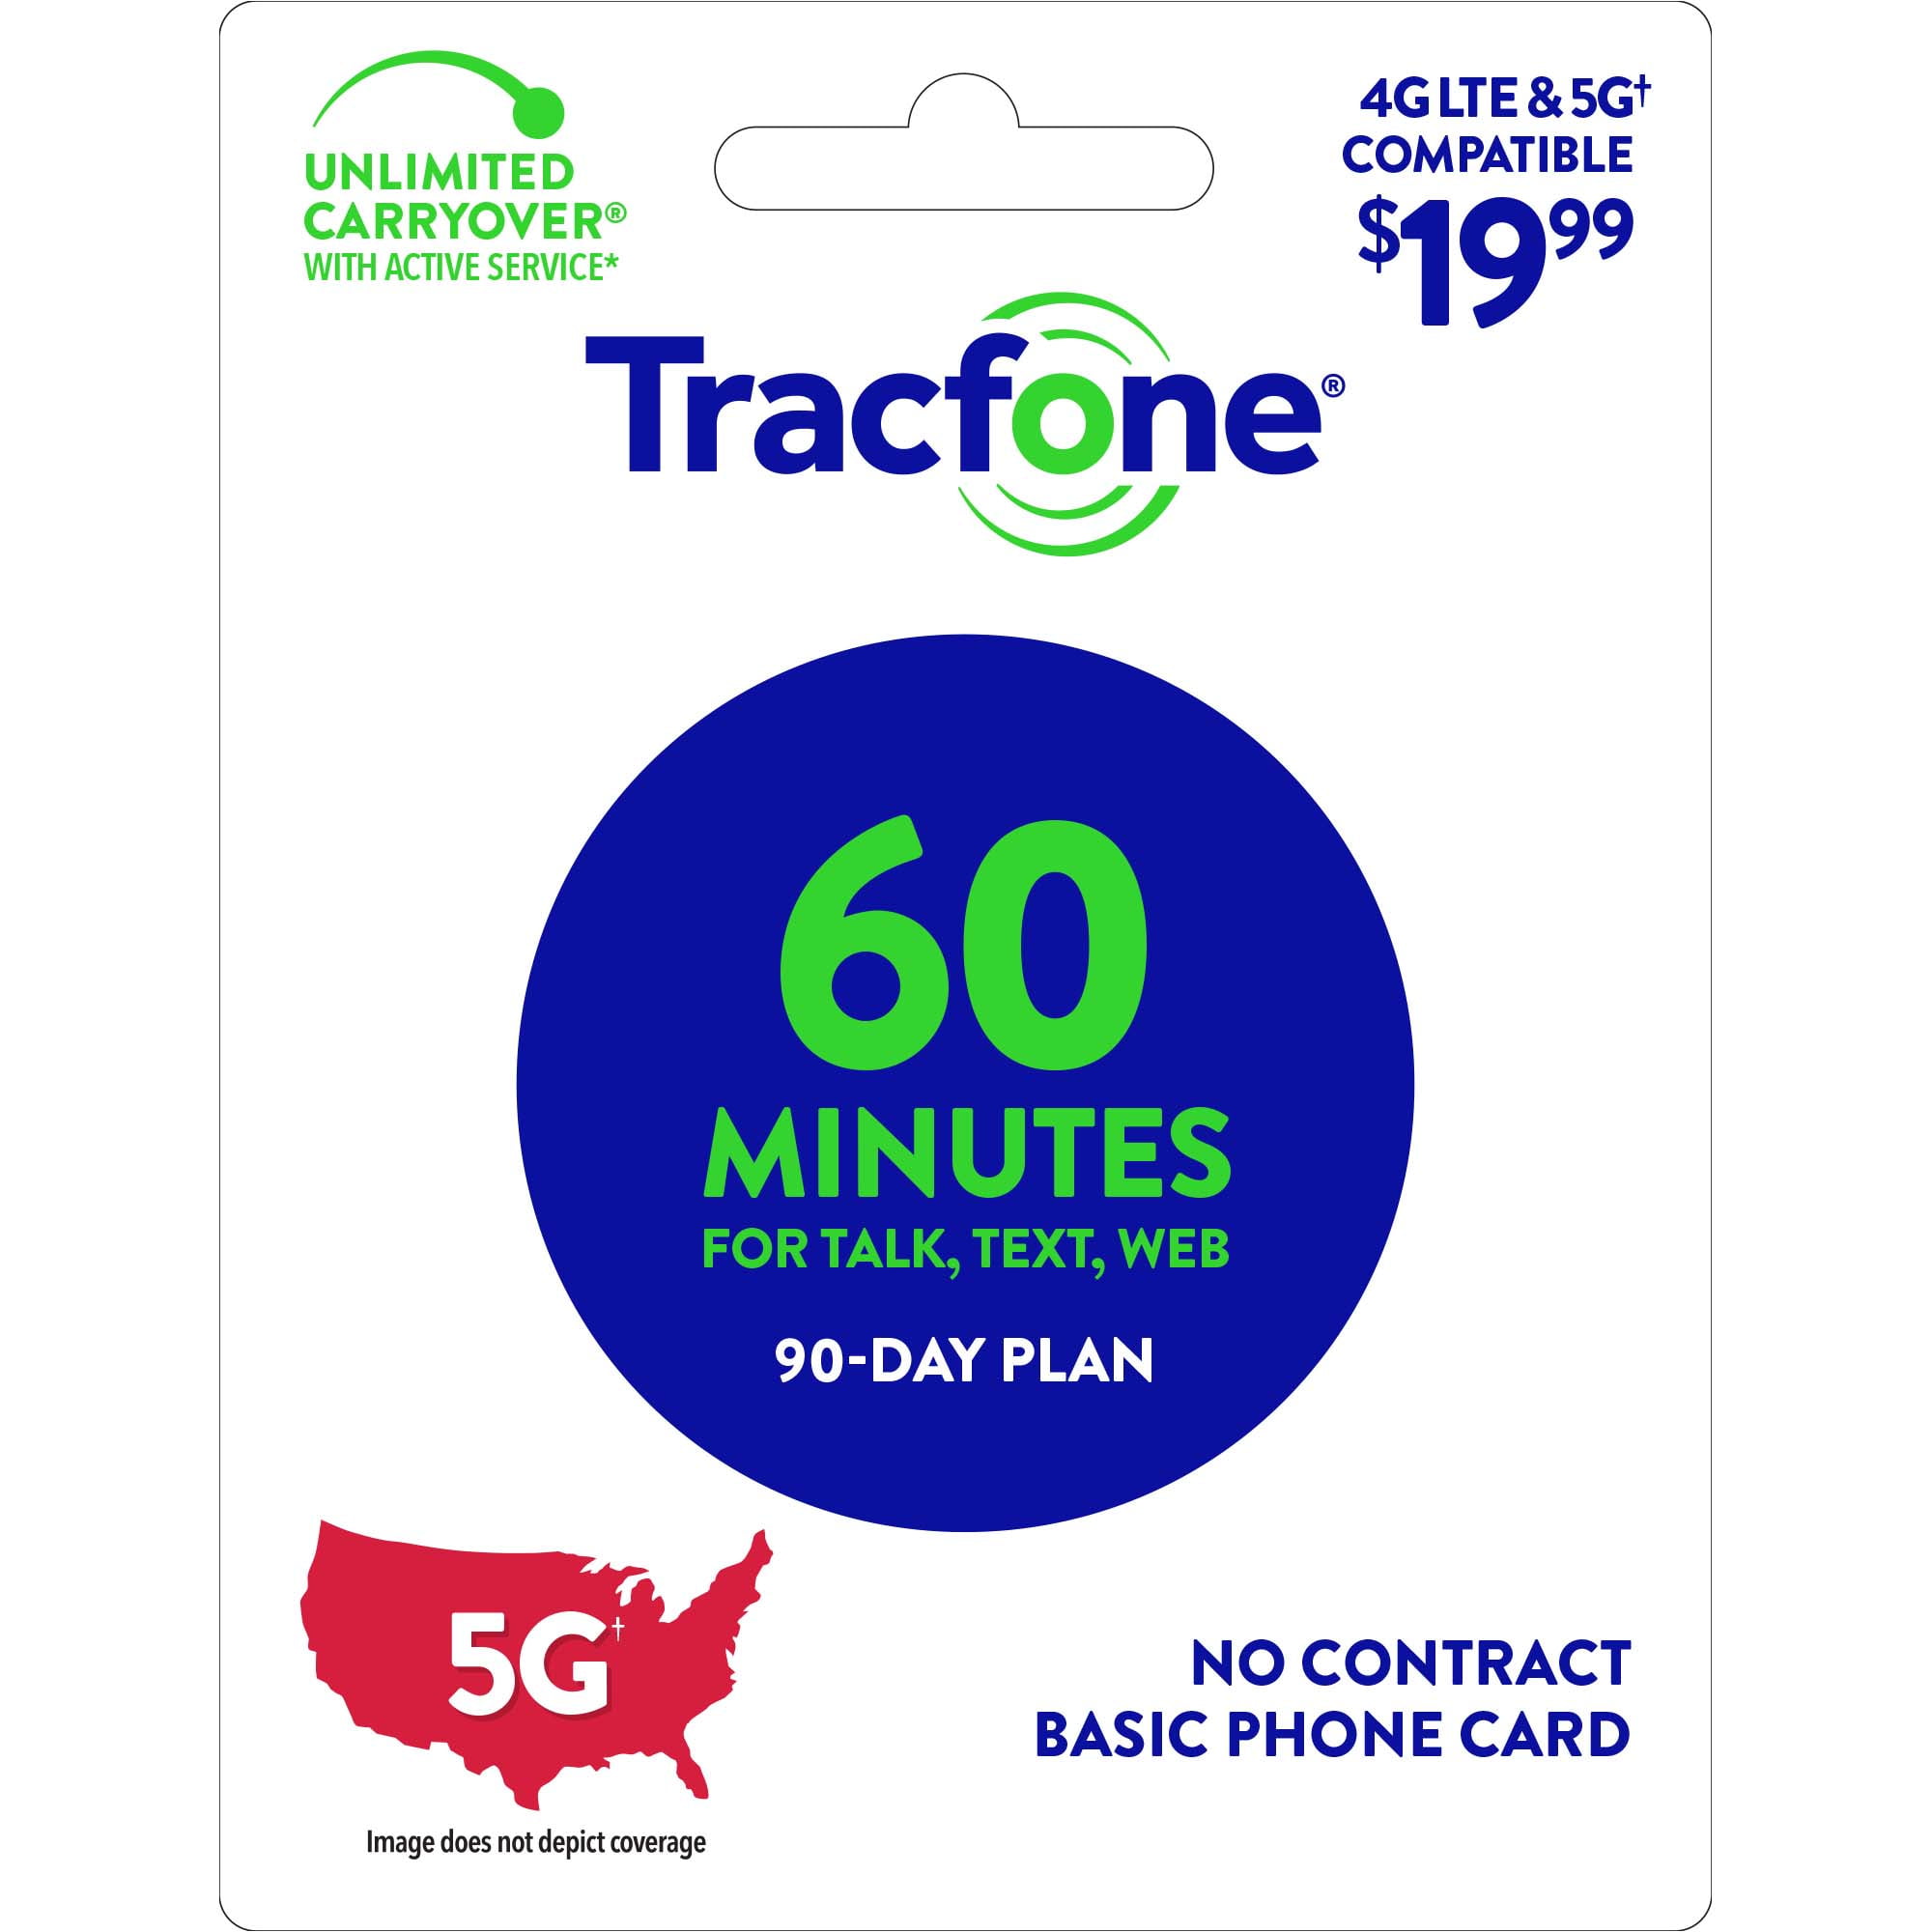 Does Tracfone accept PayPal? — Knoji